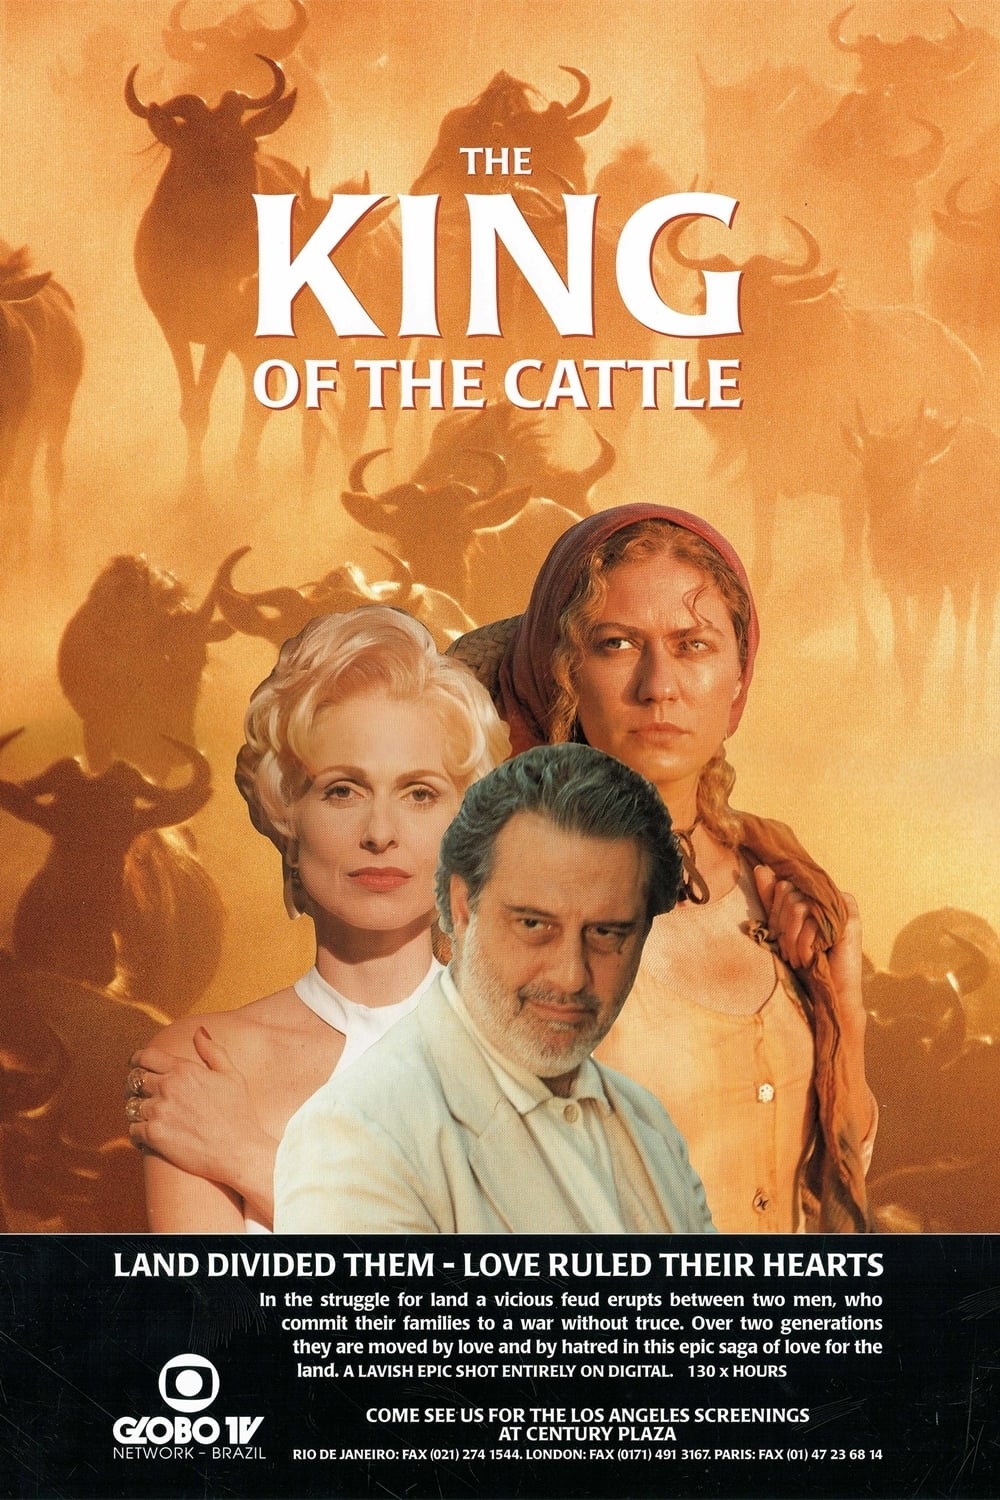 The King of The Cattle (1996)